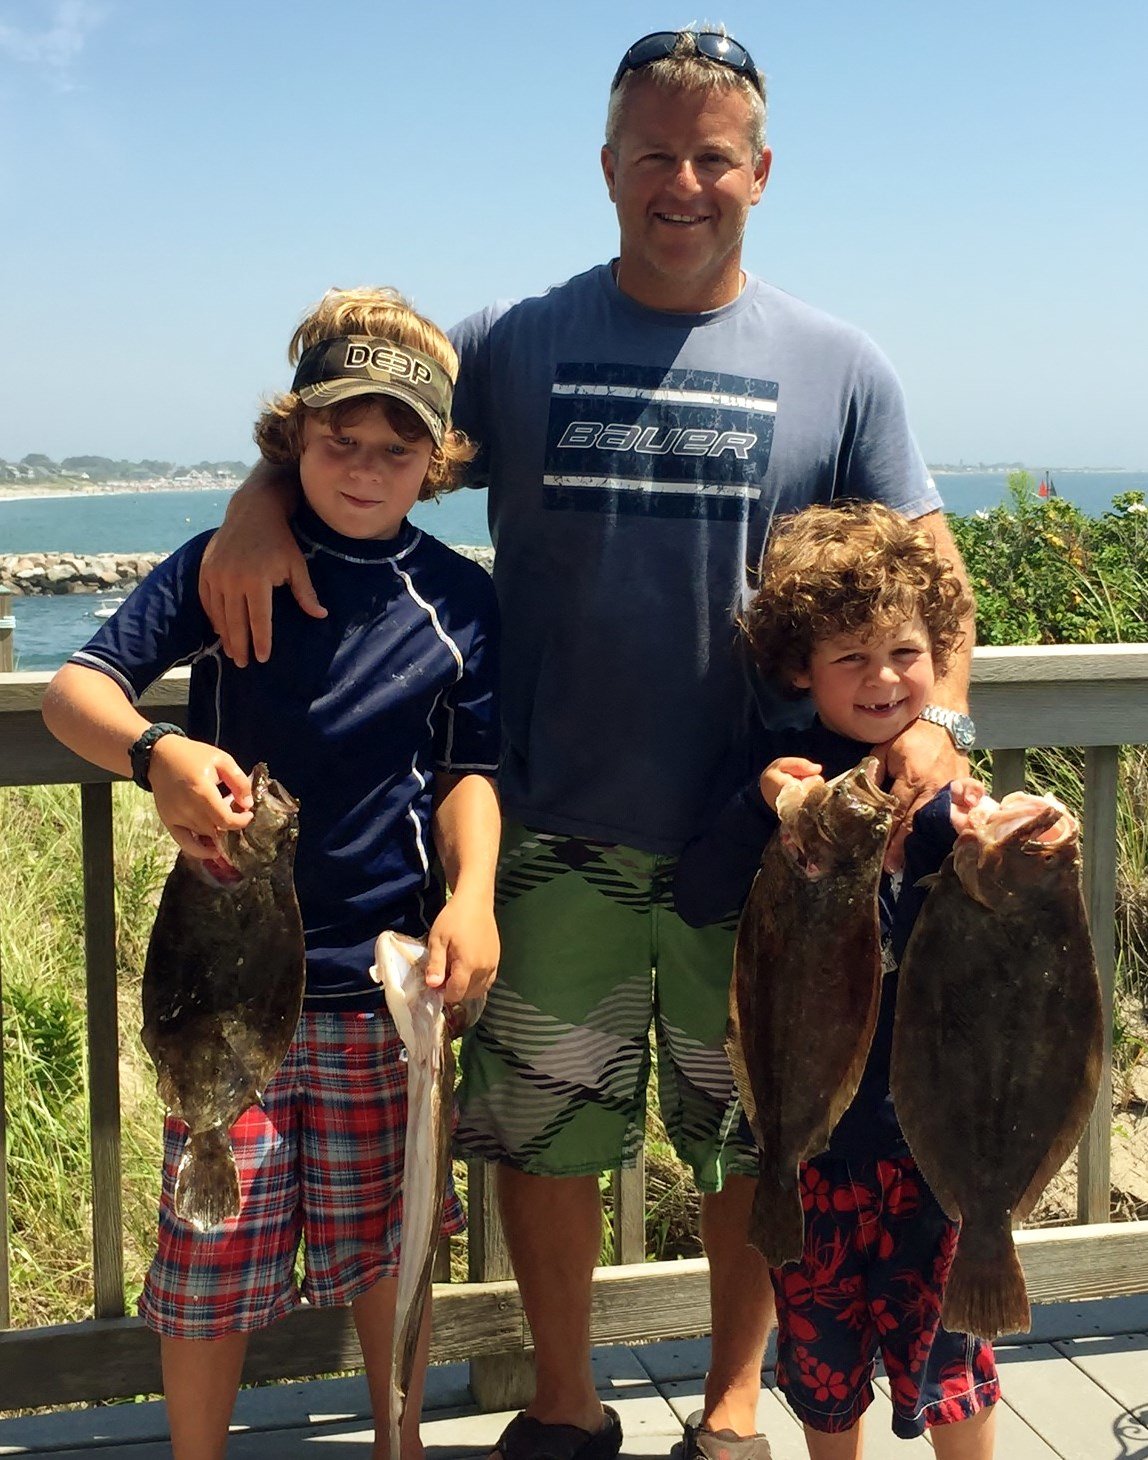 Memories of a lifetime: The Monti family fished the Hooter Buoy off Point Judith four years ago to create this family memory. The trio landed multiple summer flounder to 24”. Anglers are being asked to weigh in on summer flounder, scup and black sea bass allocation amendment by March 16.